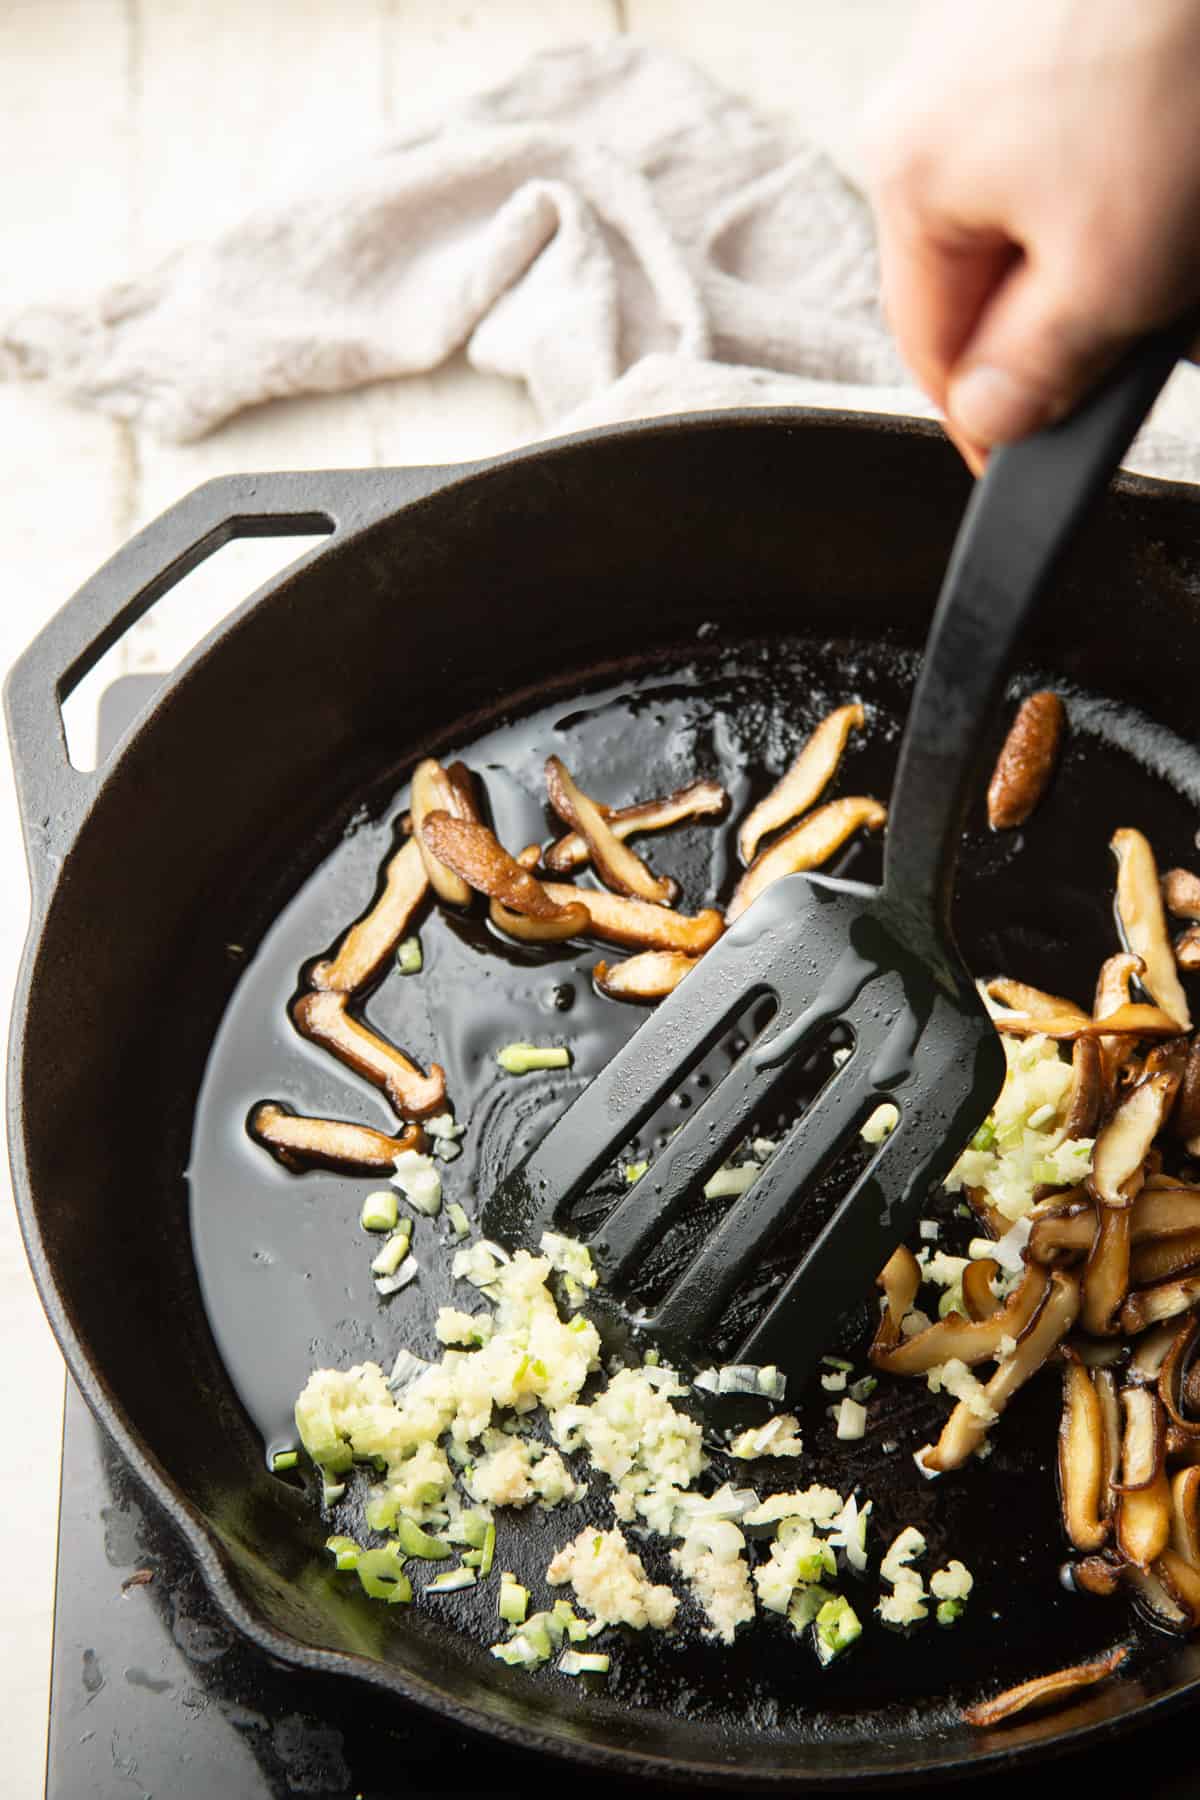 Mushrooms, garlic, ginger, and scallions cooking in a skillet.